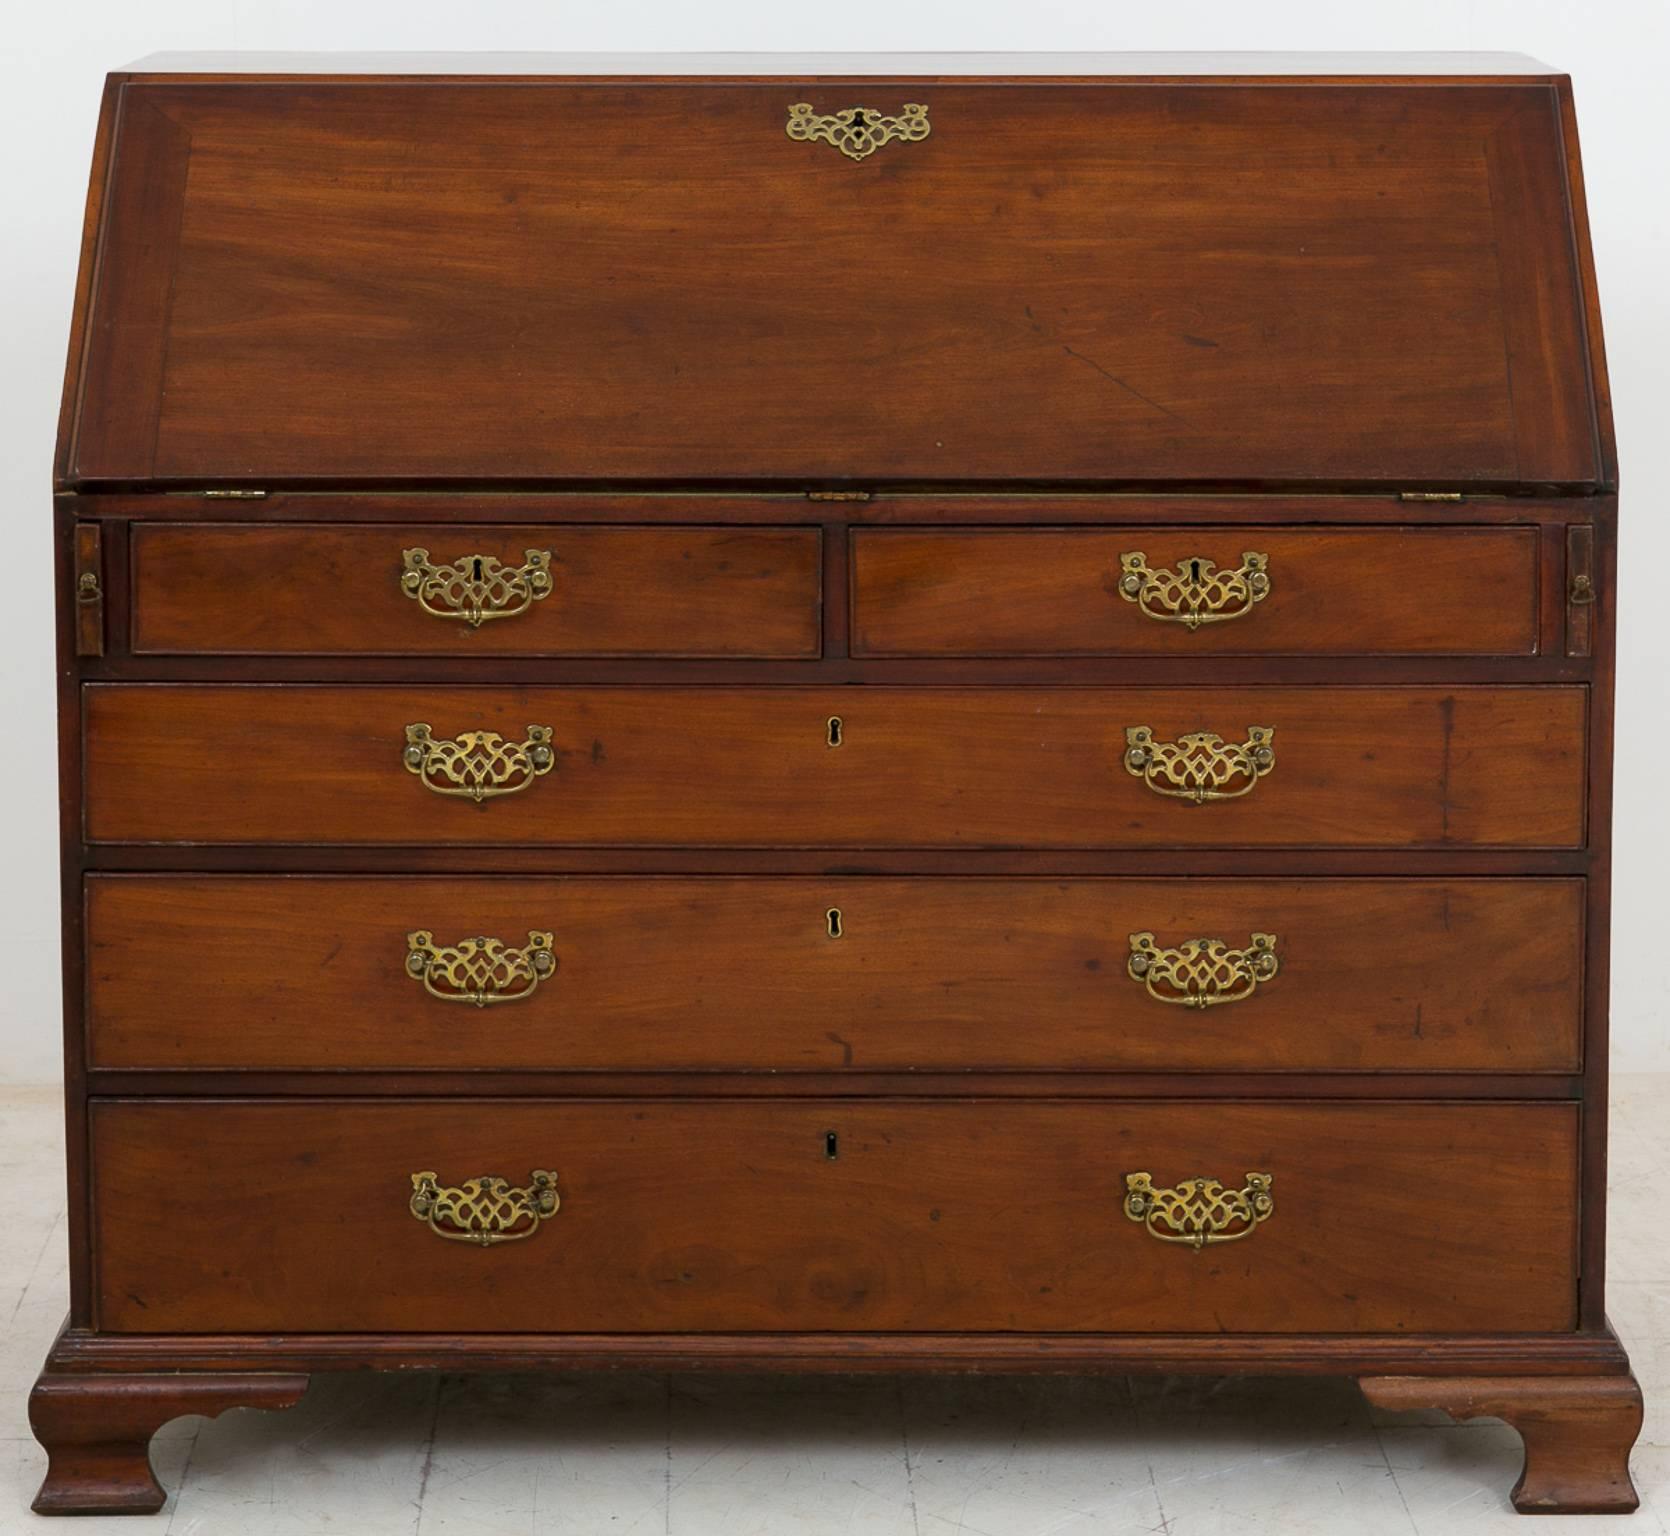 Georgian Mahogany Bureau. Standing on Ogee feet.
Two over three oak lined graduated drawers with original handles.
The interior consisting of an arrangement of pigeonholes and drawers the central cupboard featuring a marquetry panel.
The green